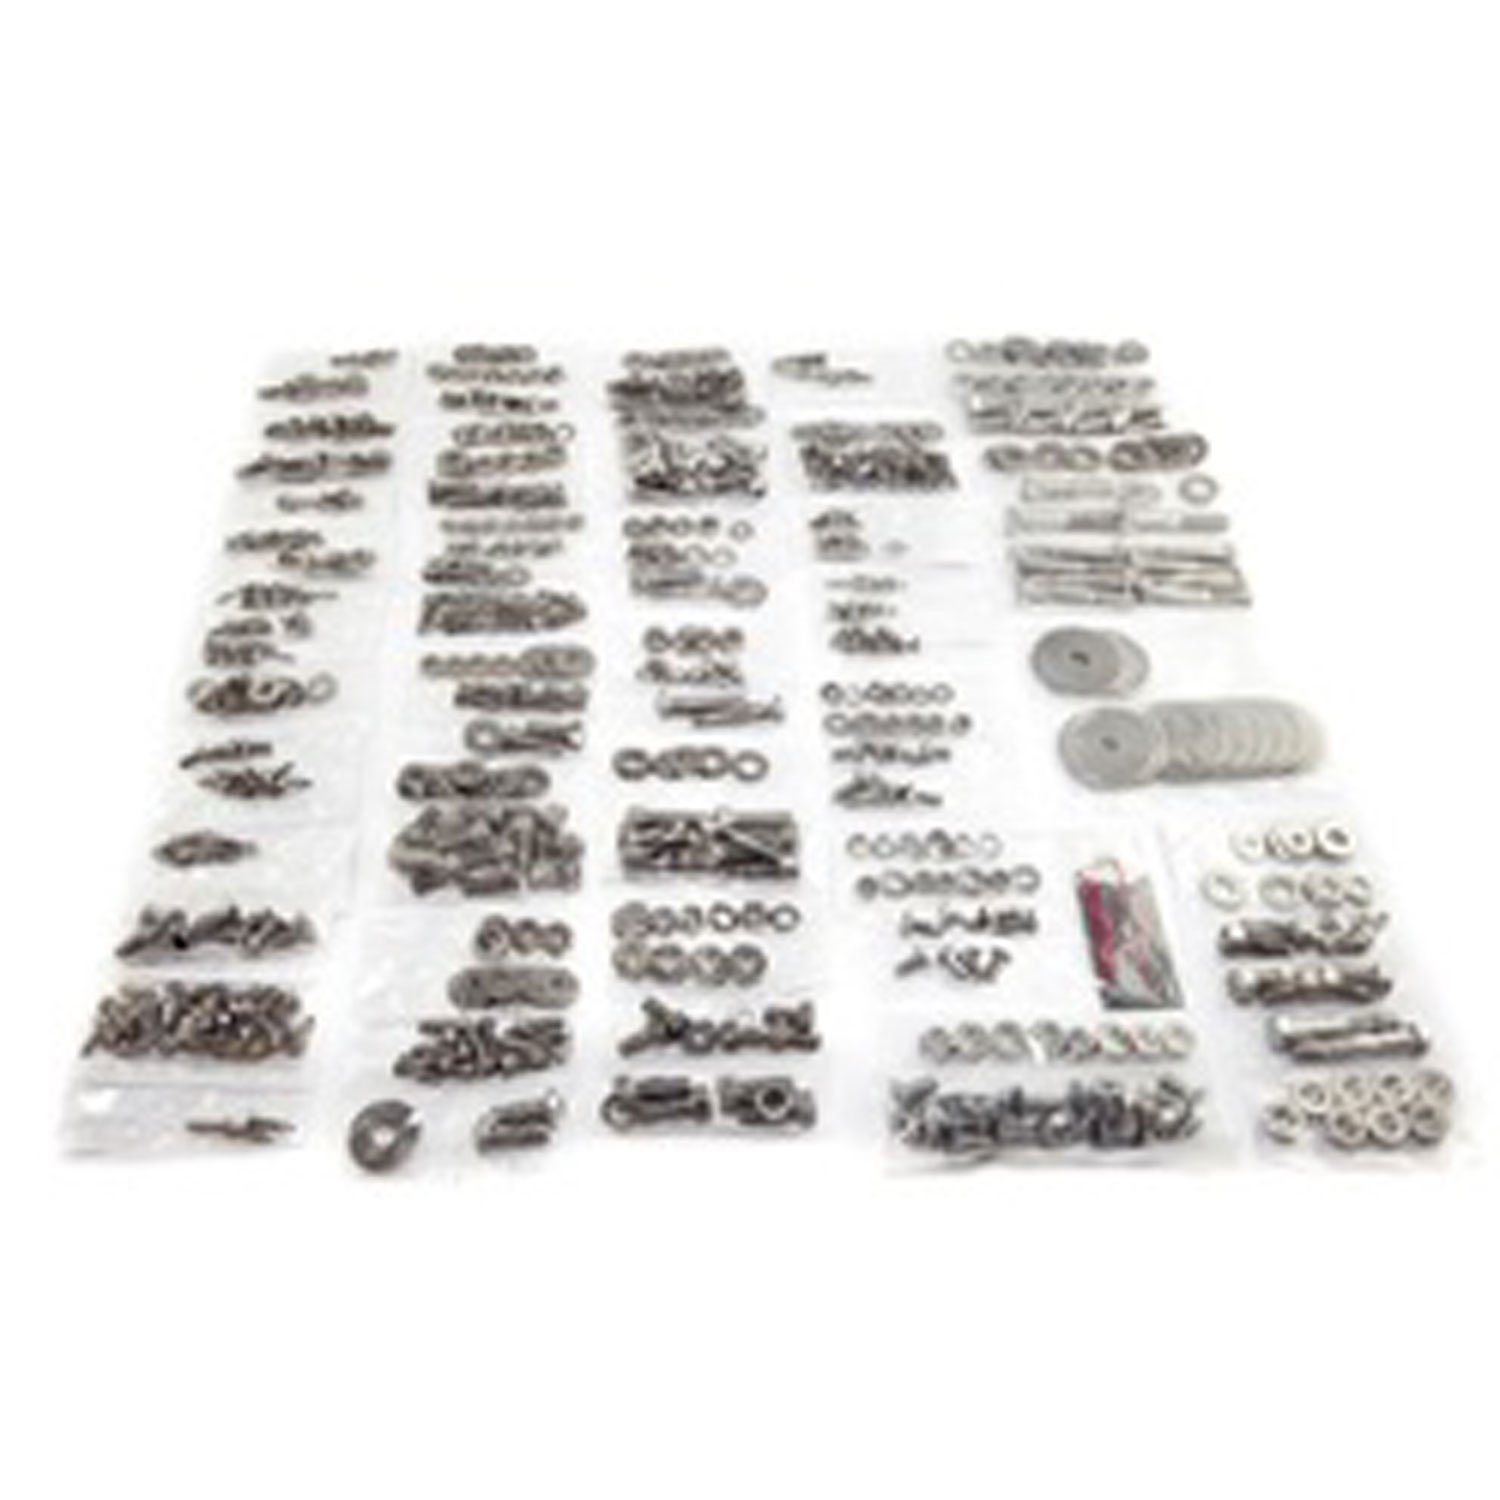 This 624 piece stainless steel body fastener kit